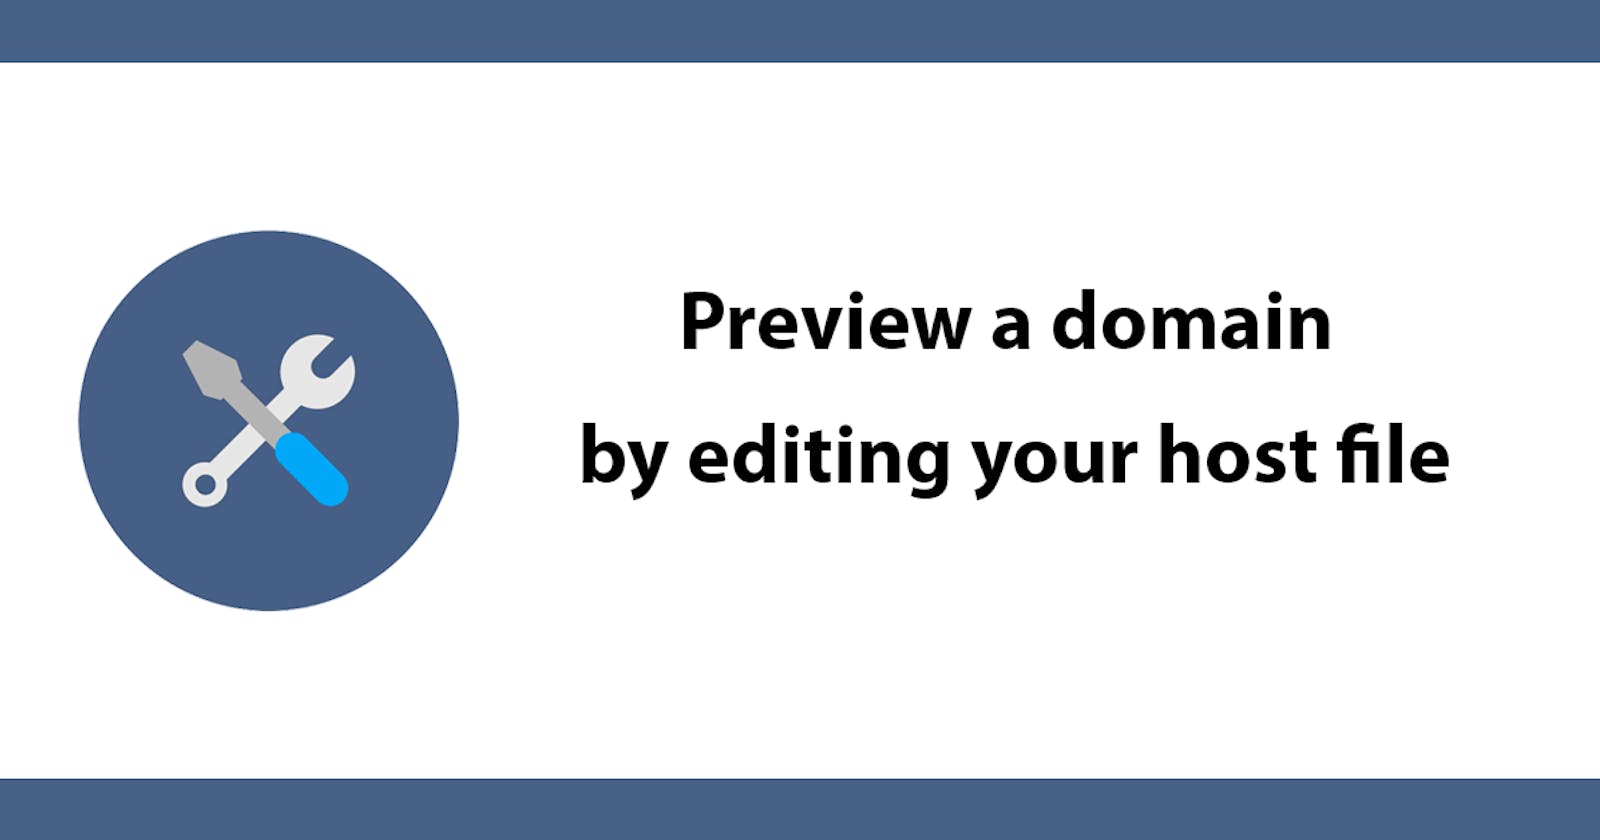 Preview a domain by editing your host file